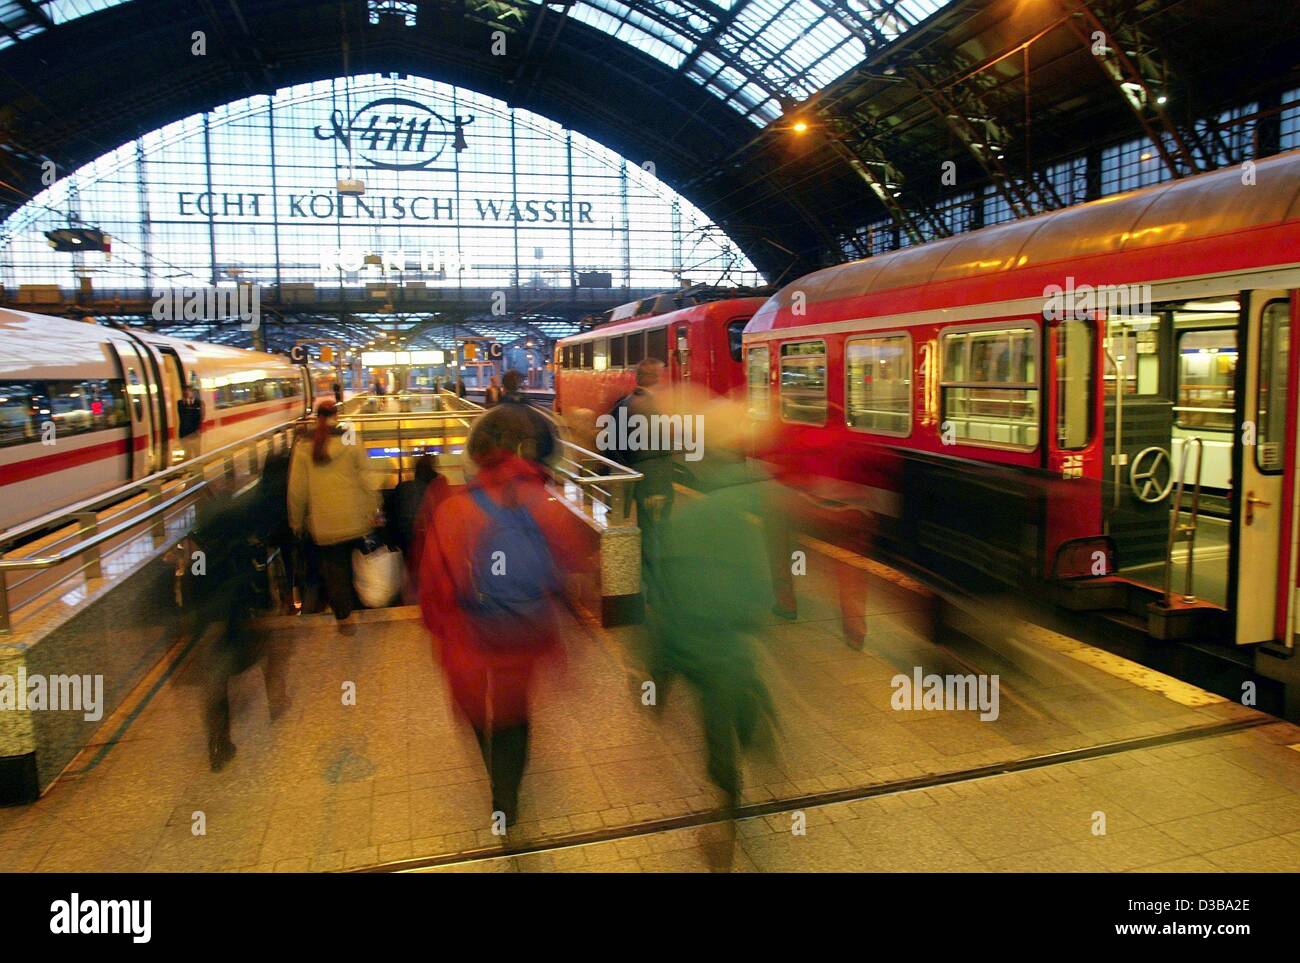 (dpa) - Commuters and travellers get off the trains on a platform at the central train station in Cologne, Germany, 25 November 2002. Stock Photo